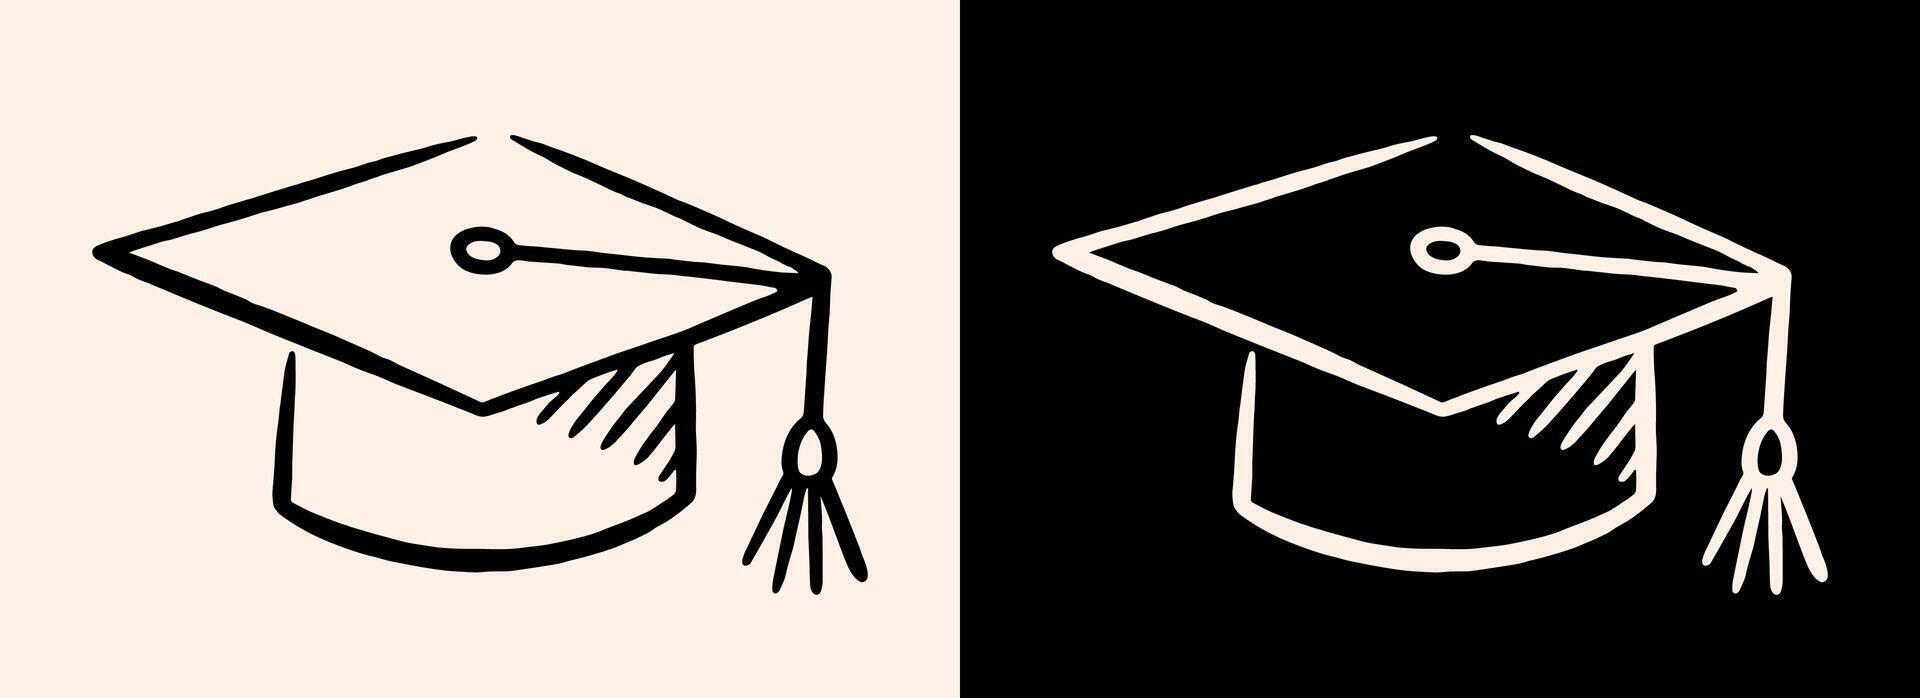 Grad graduation cap sketch hand drawn drawing illustration black and white ink line art dark academia study cute aesthetic girl student bachelor's degree graduate vision board element cut file vector